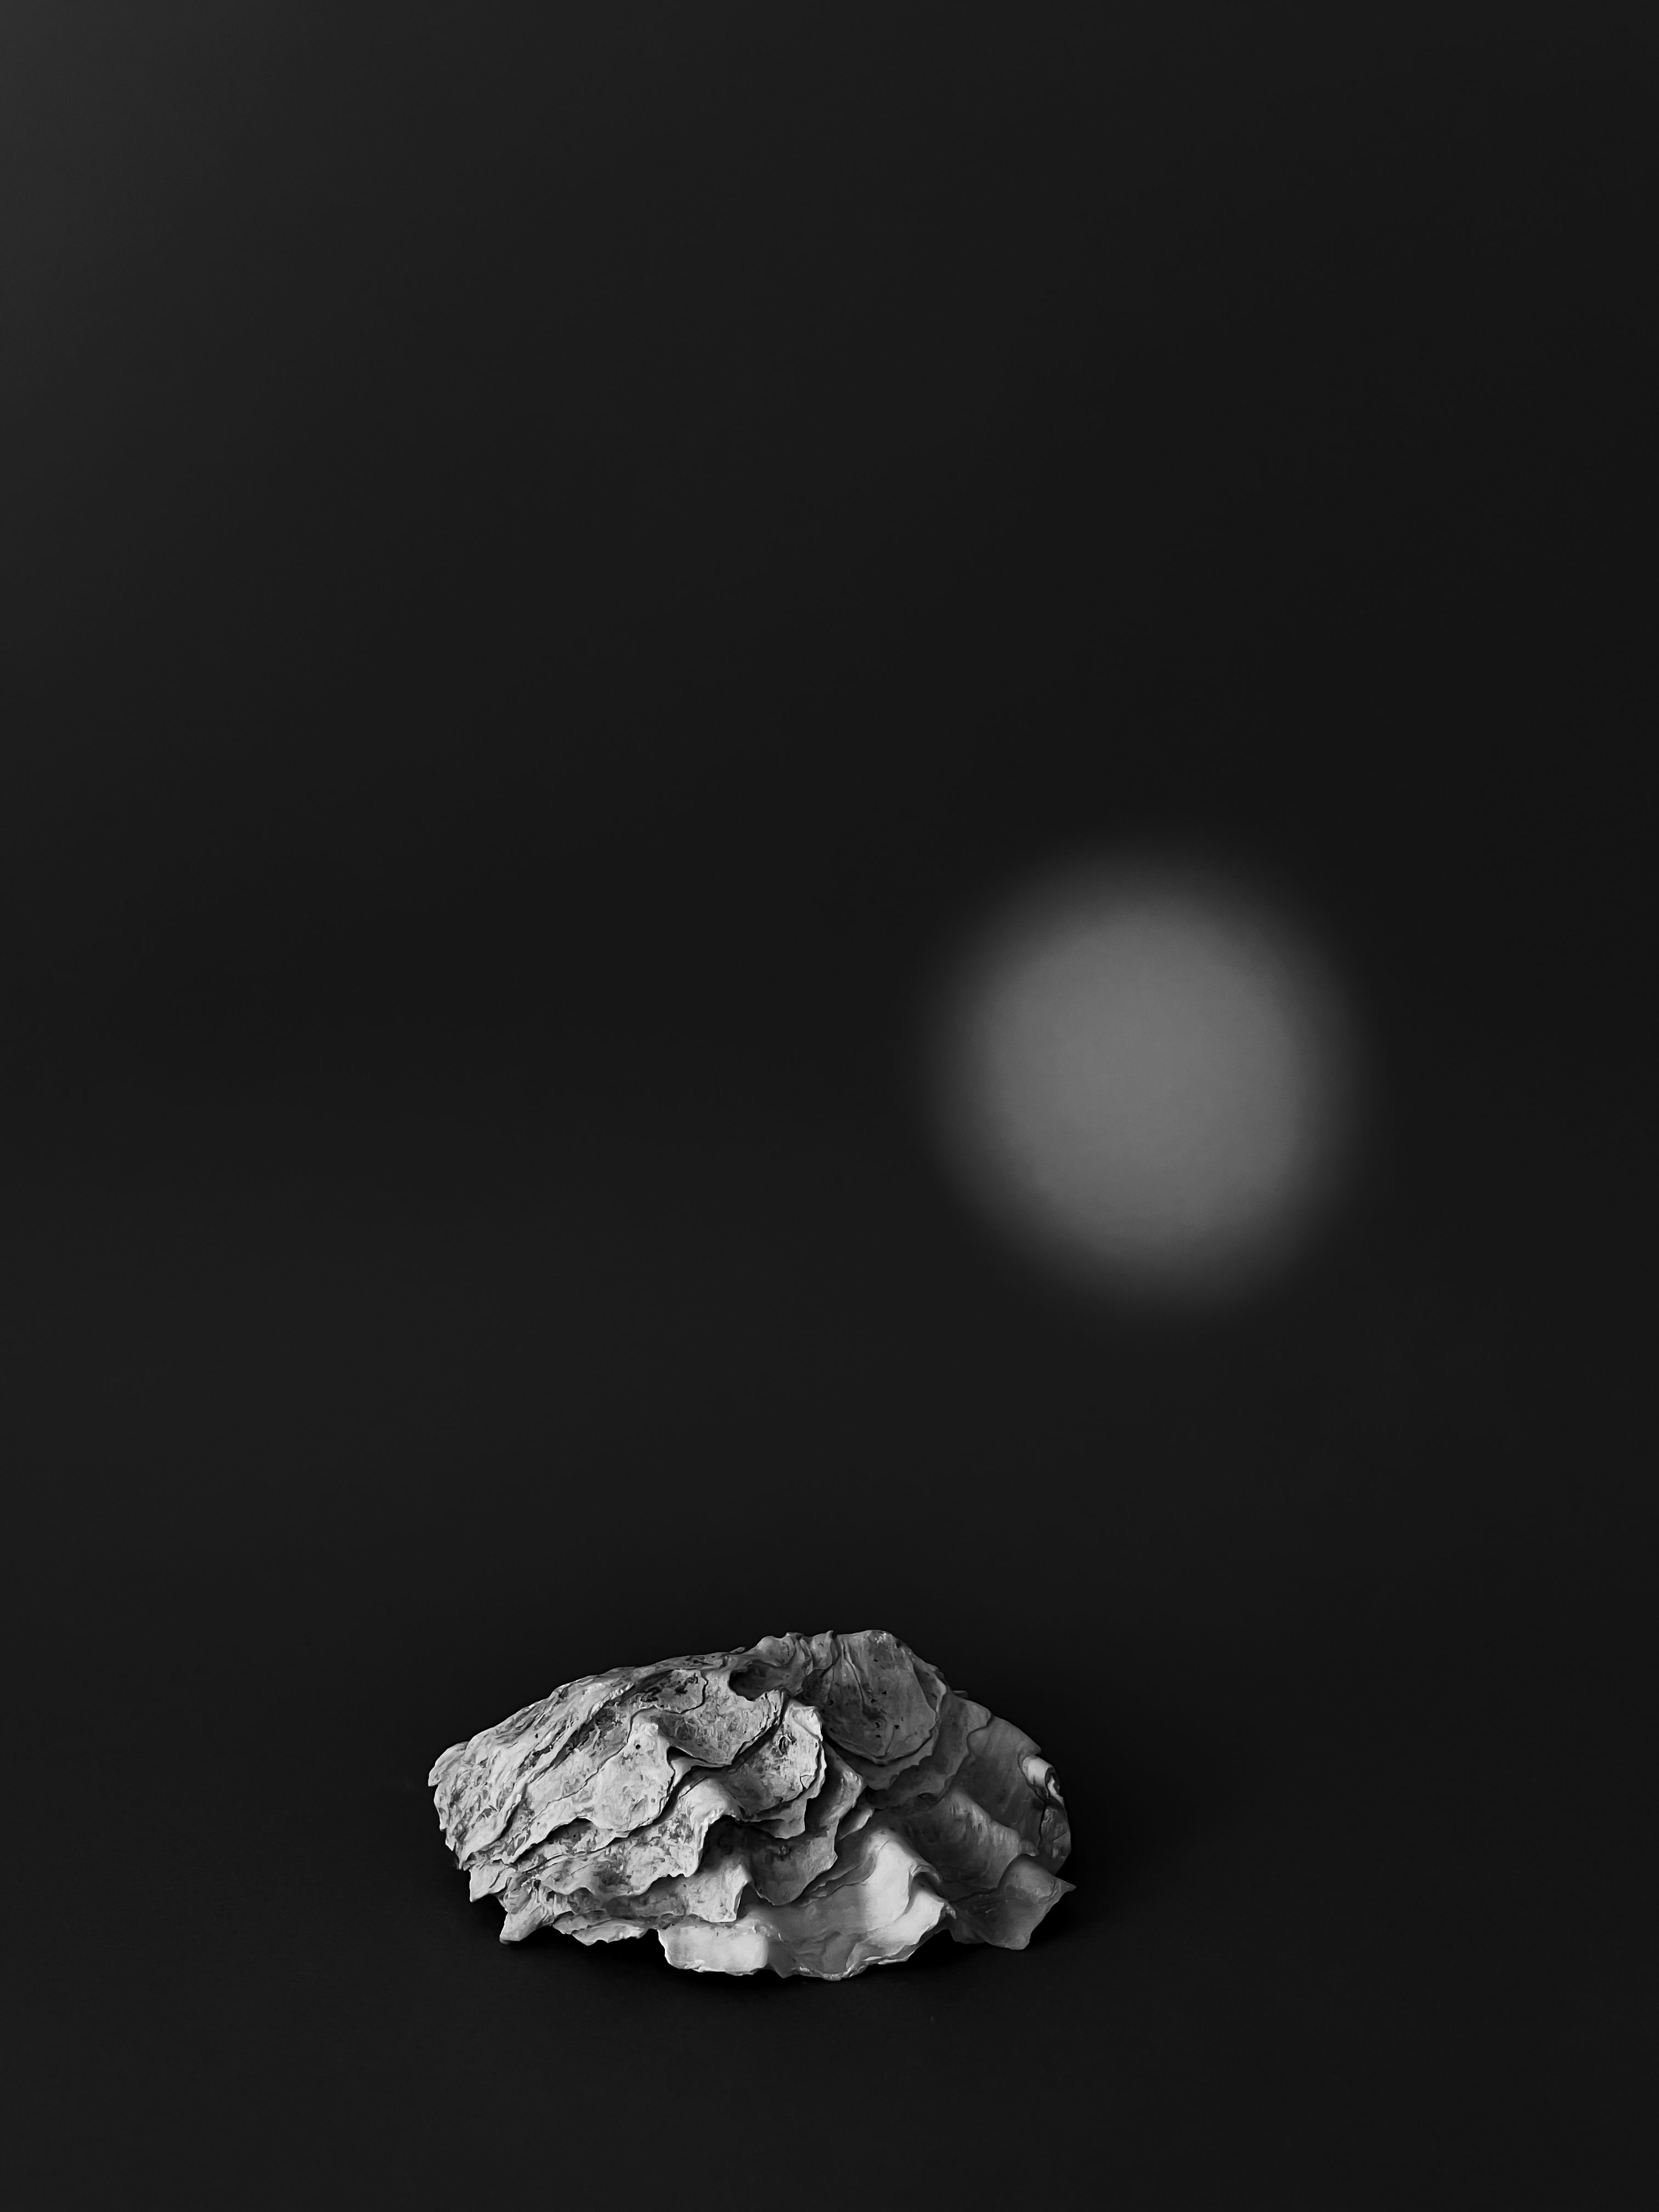 Single oyster on a black background and a soft focused light point